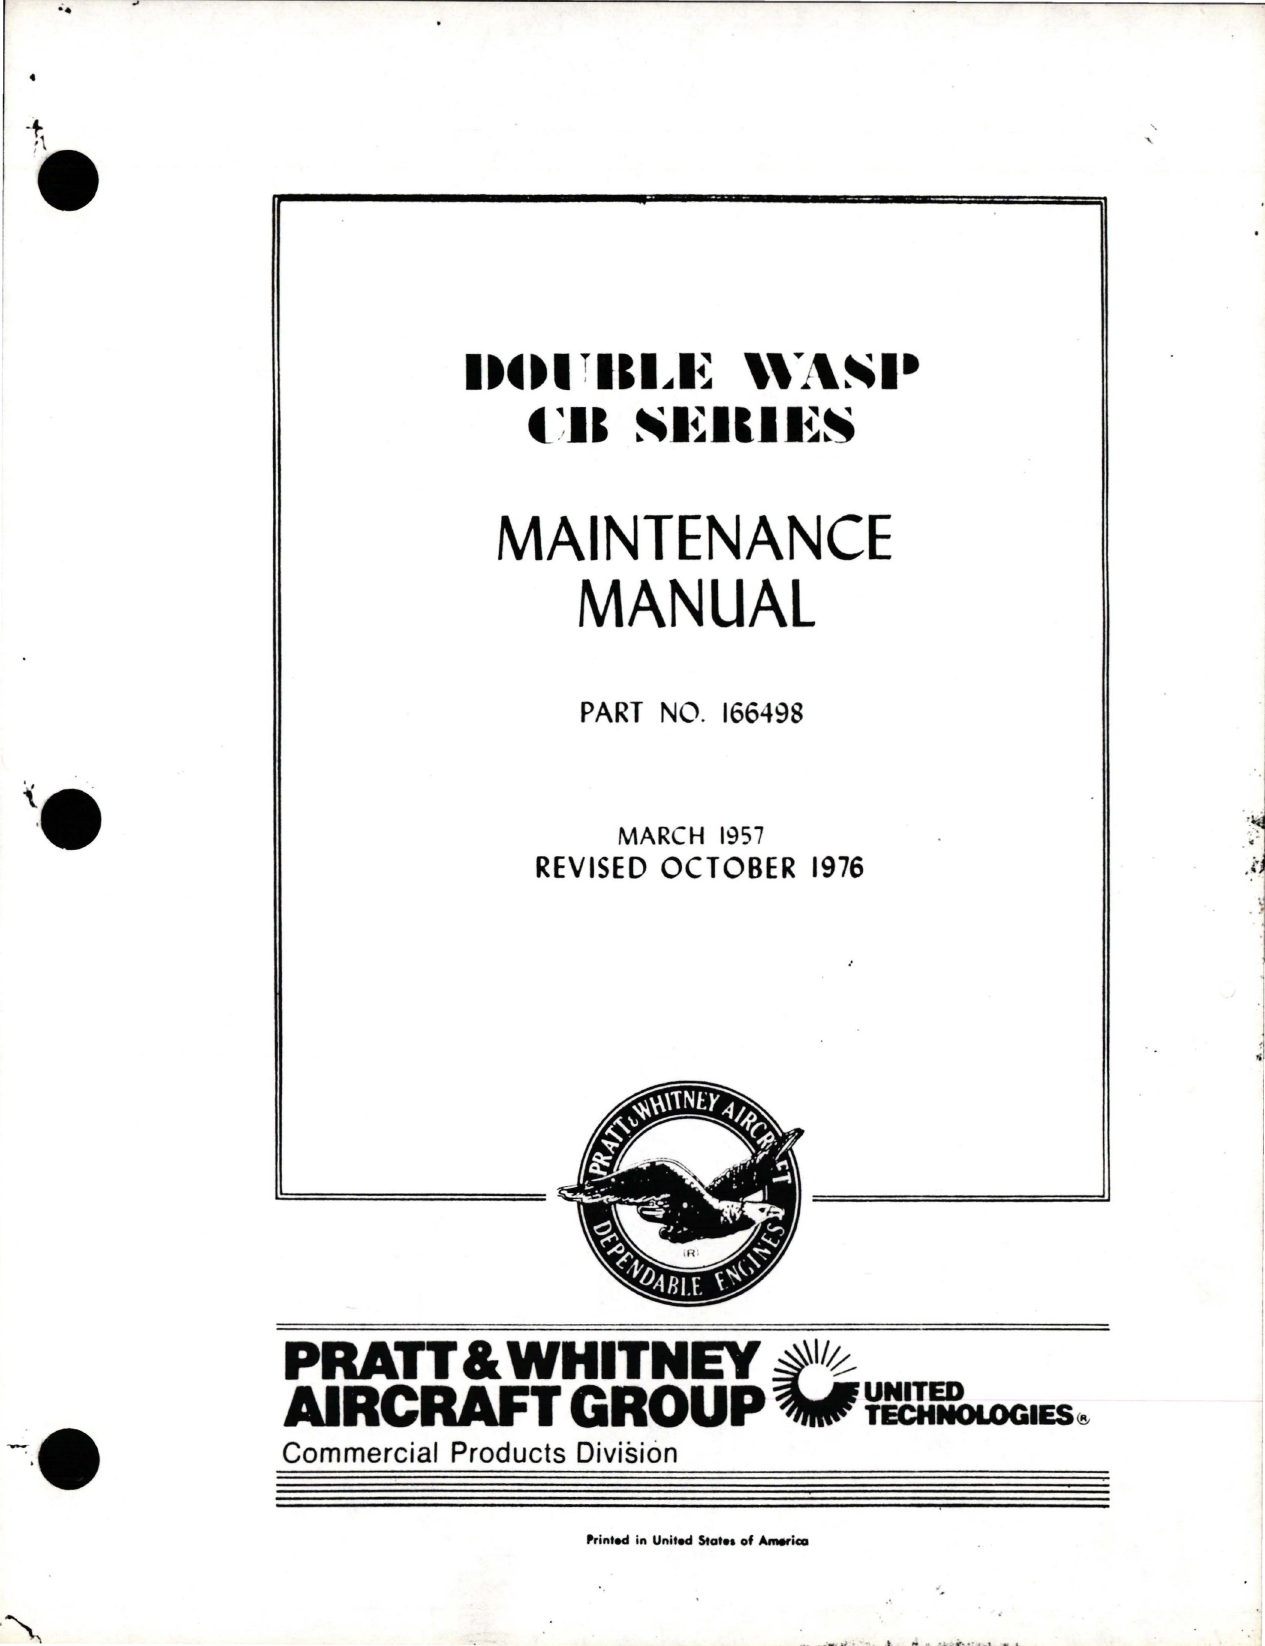 Sample page 1 from AirCorps Library document: Maintenance Manual for Double Wasp CB Series - Part 166498